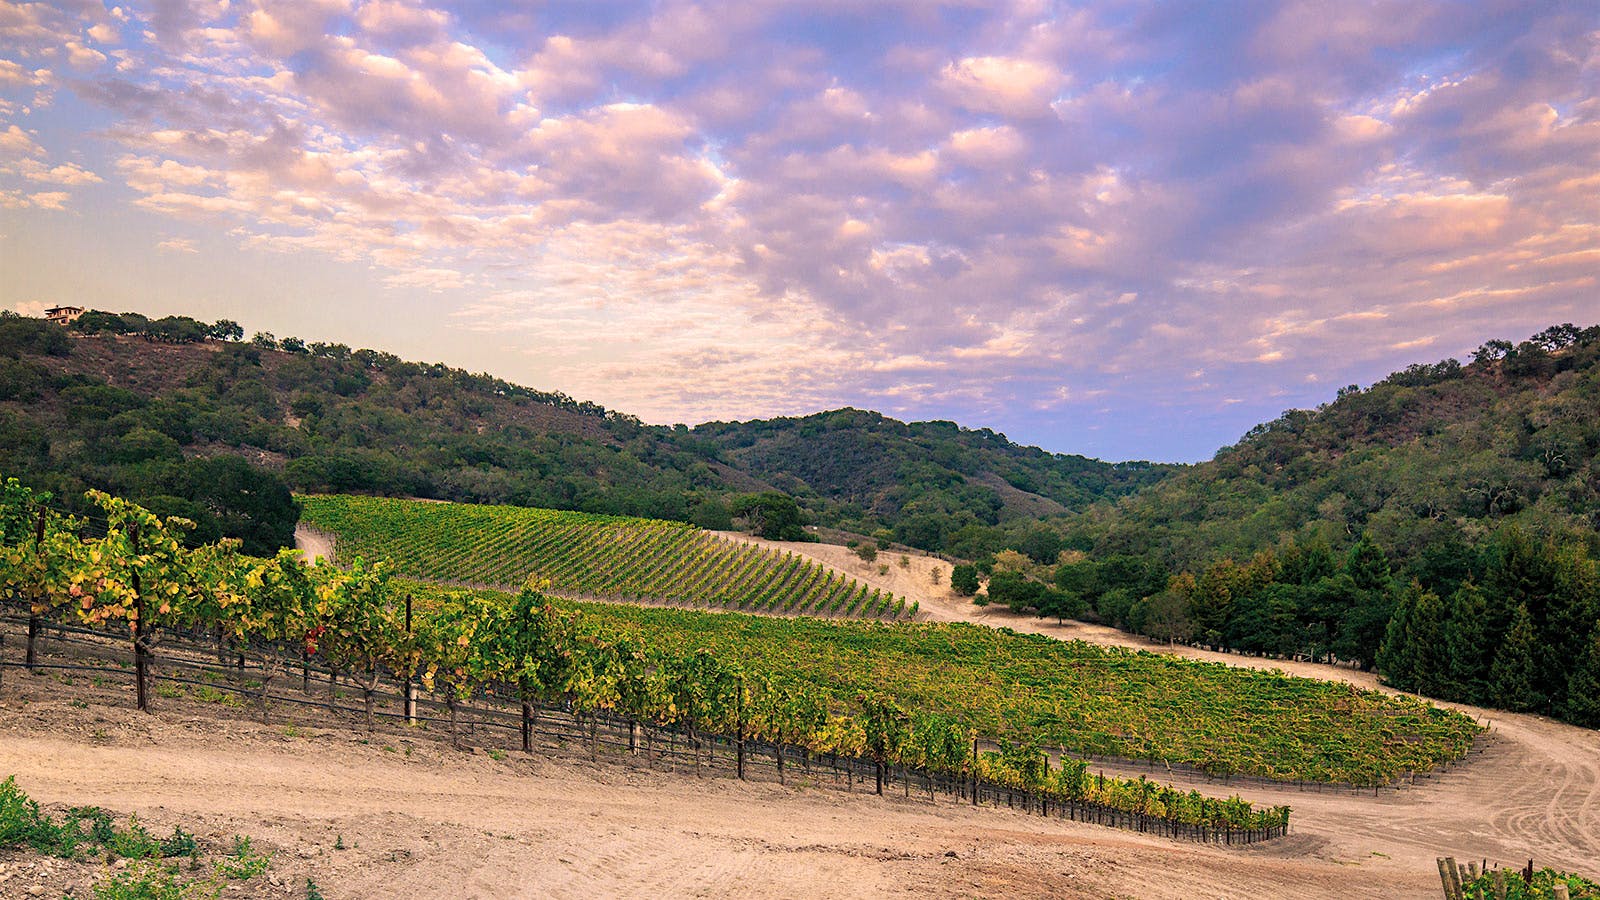 12 Enchanting California Pinot Noirs Up to 91 Points